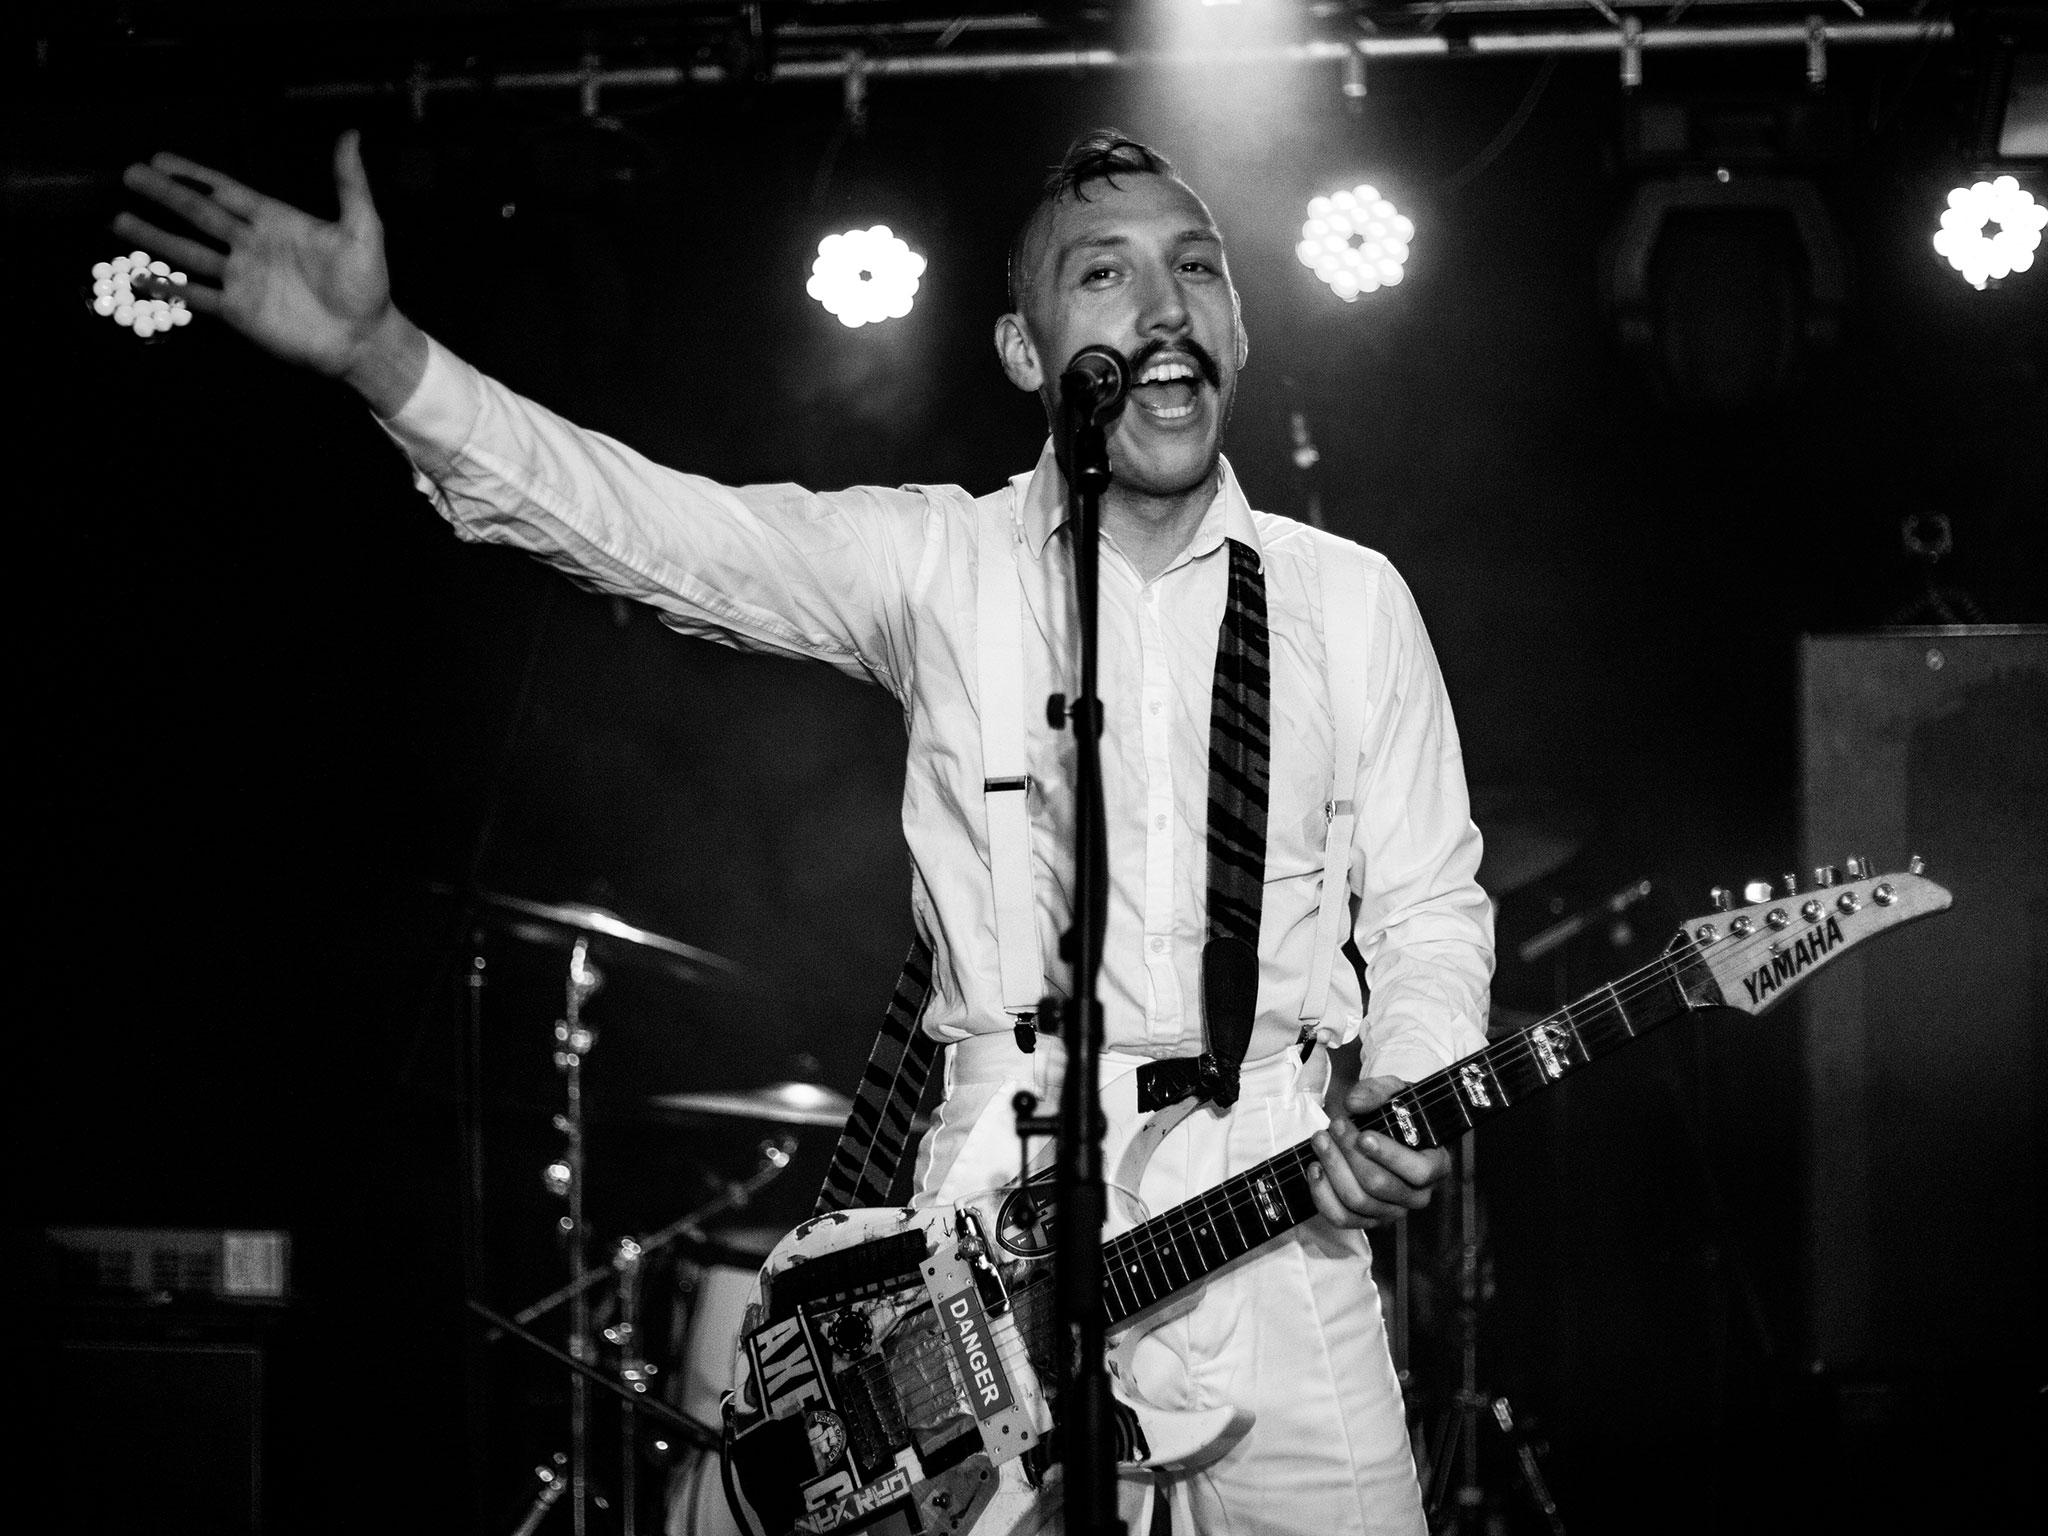 Jamie Lenman addresses the crowd with affable charm at the Scala, London